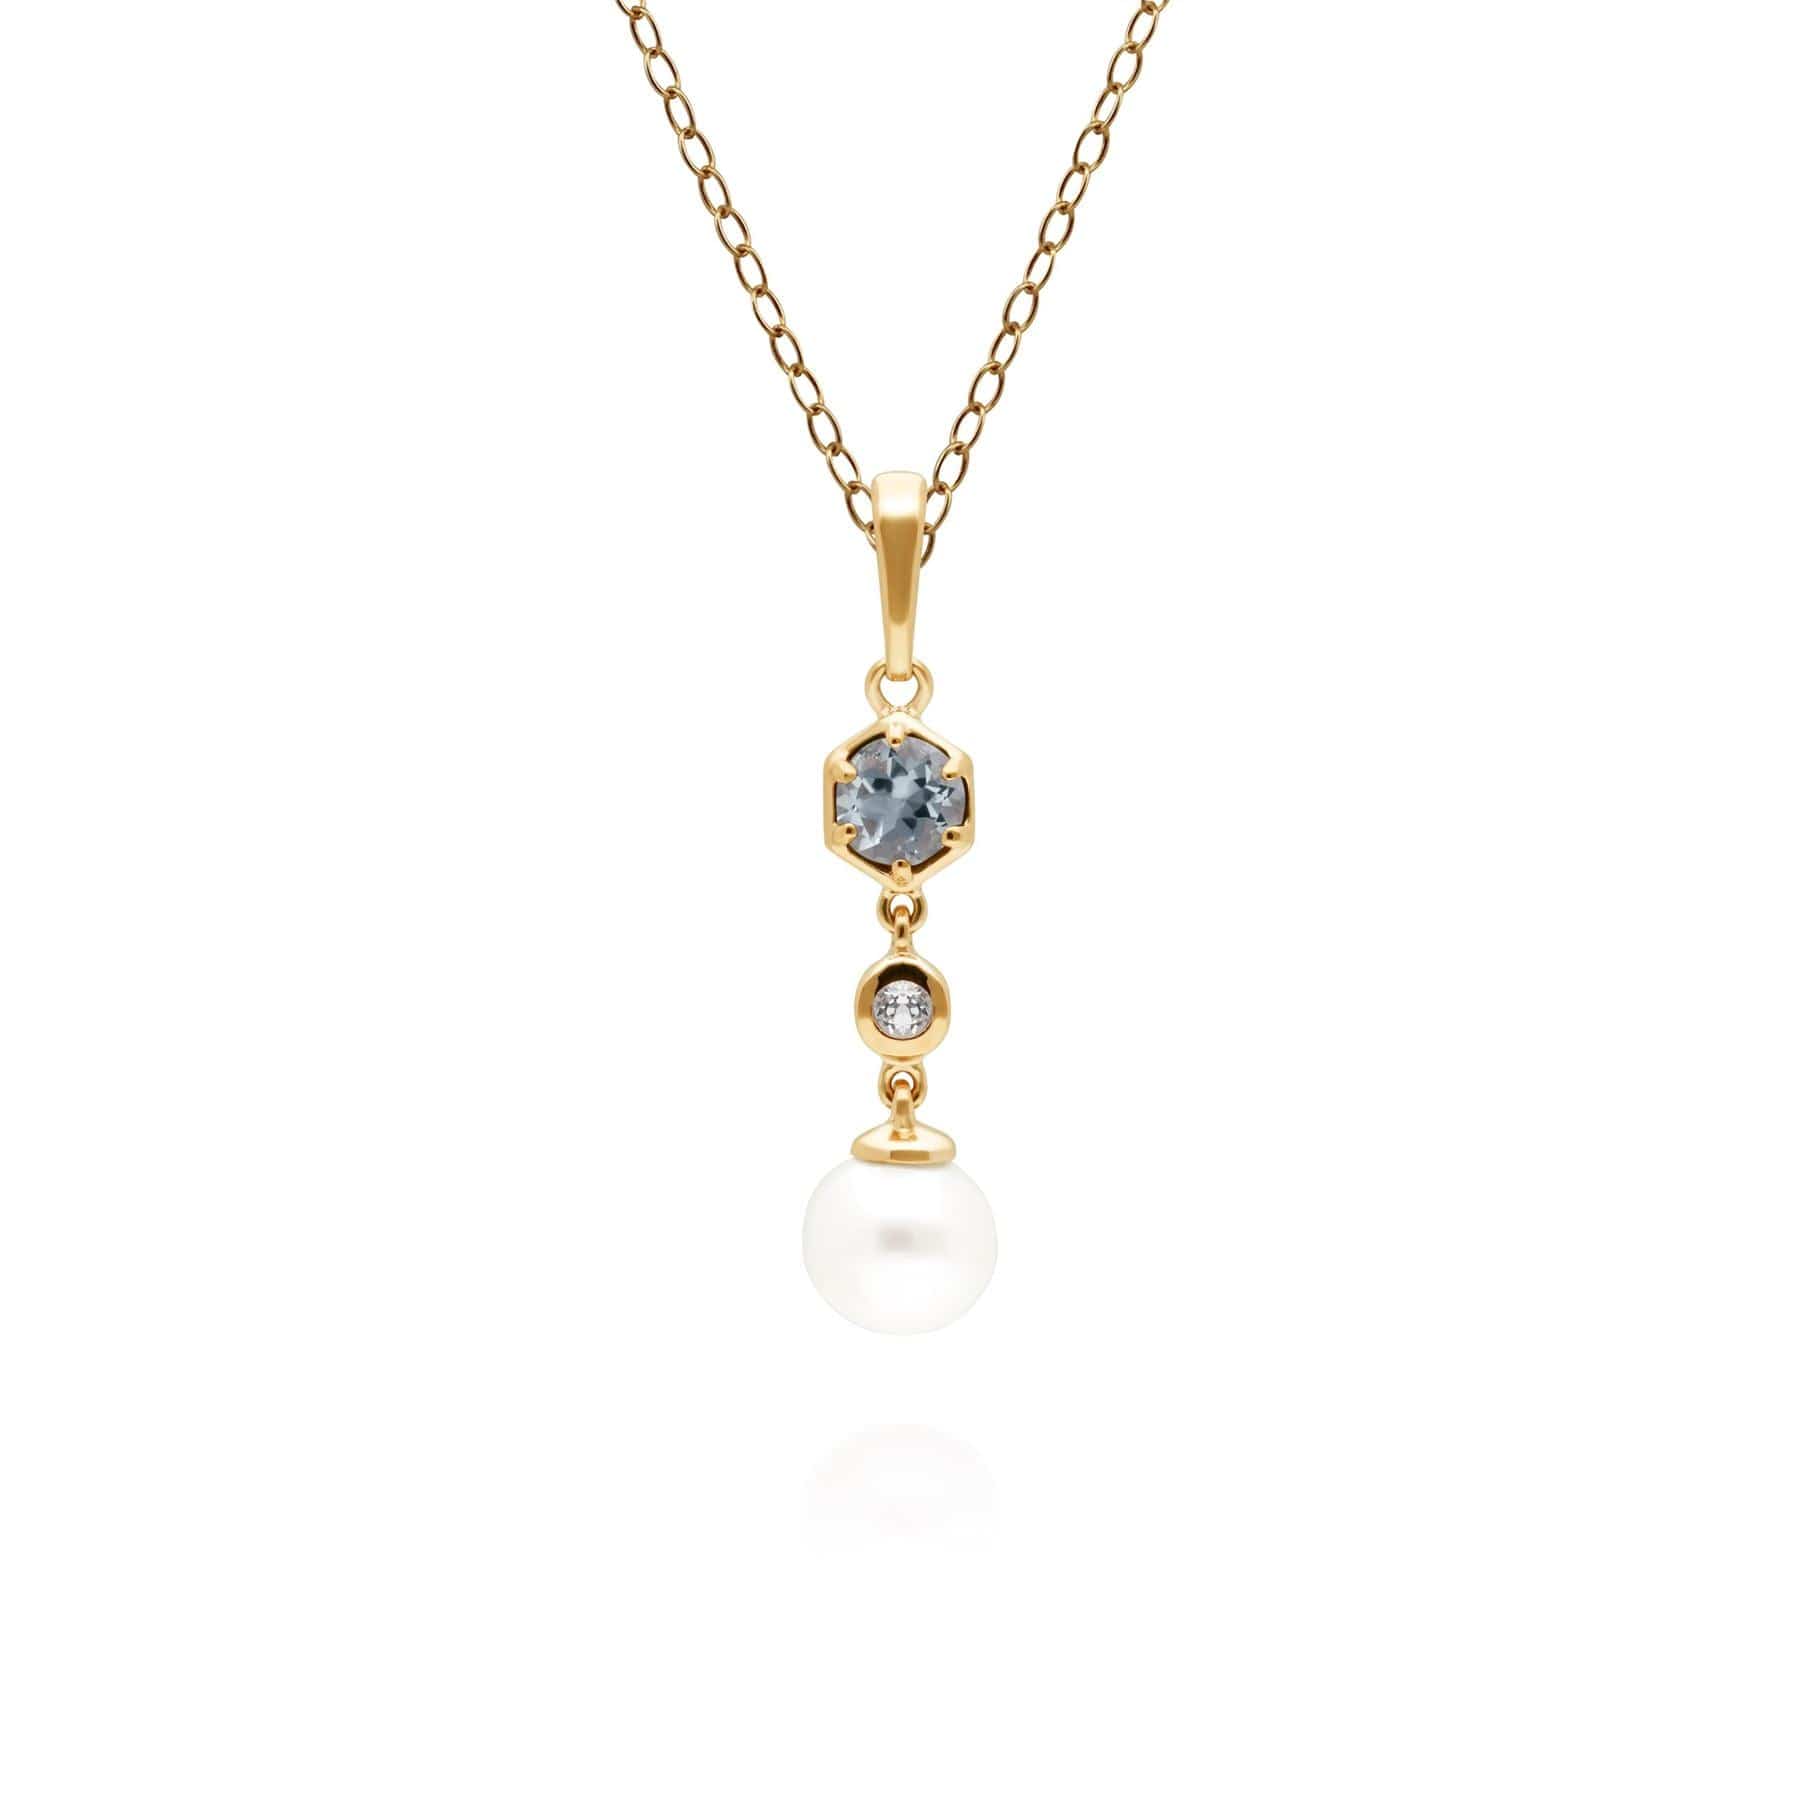 Photos - Pendant / Choker Necklace Modern Pearl, Aquamarine & Topaz Drop Pendant in Gold Plated Silver